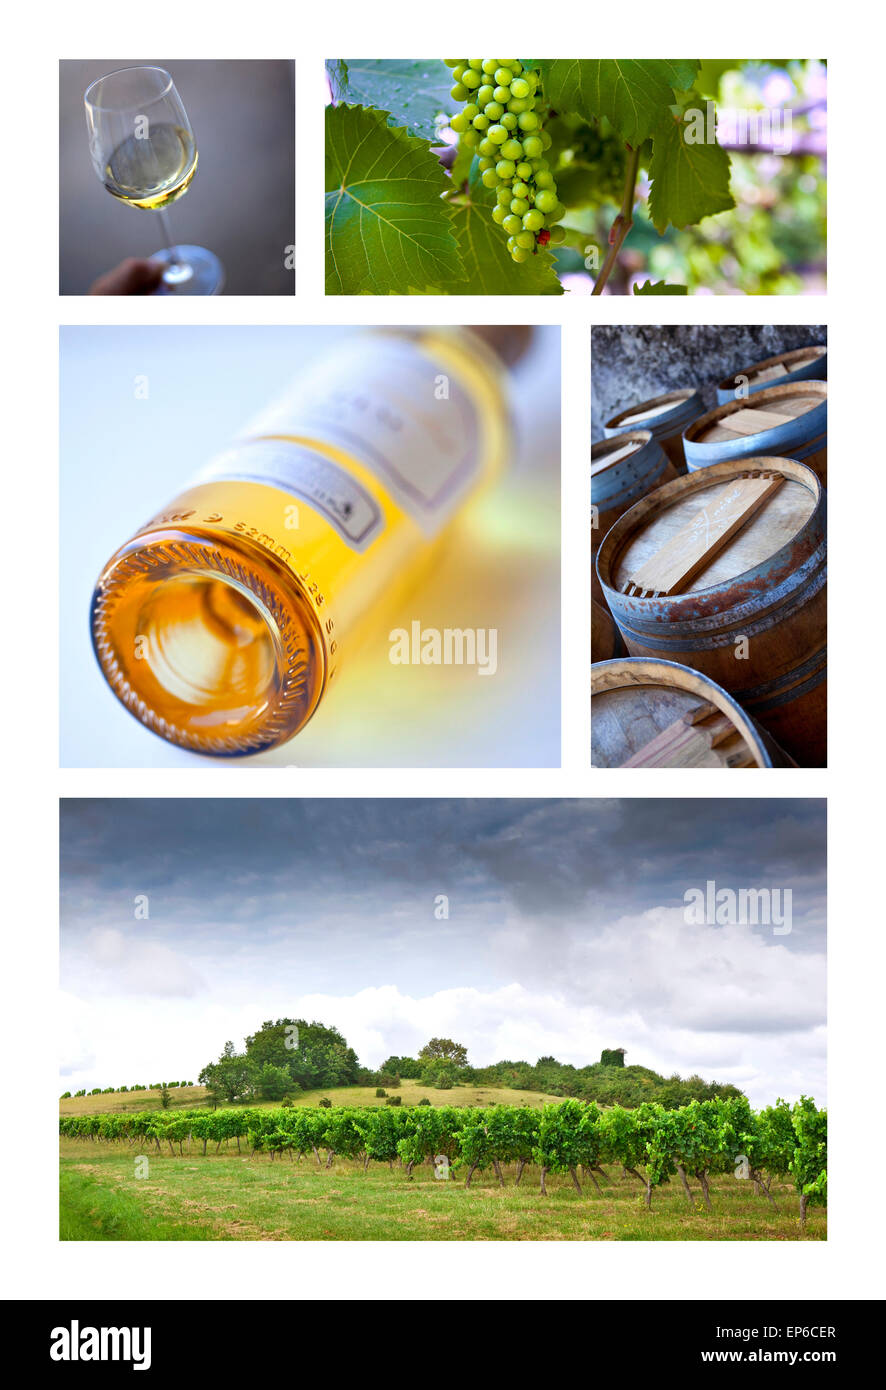 Viticulture and French wineries on a collage Stock Photo